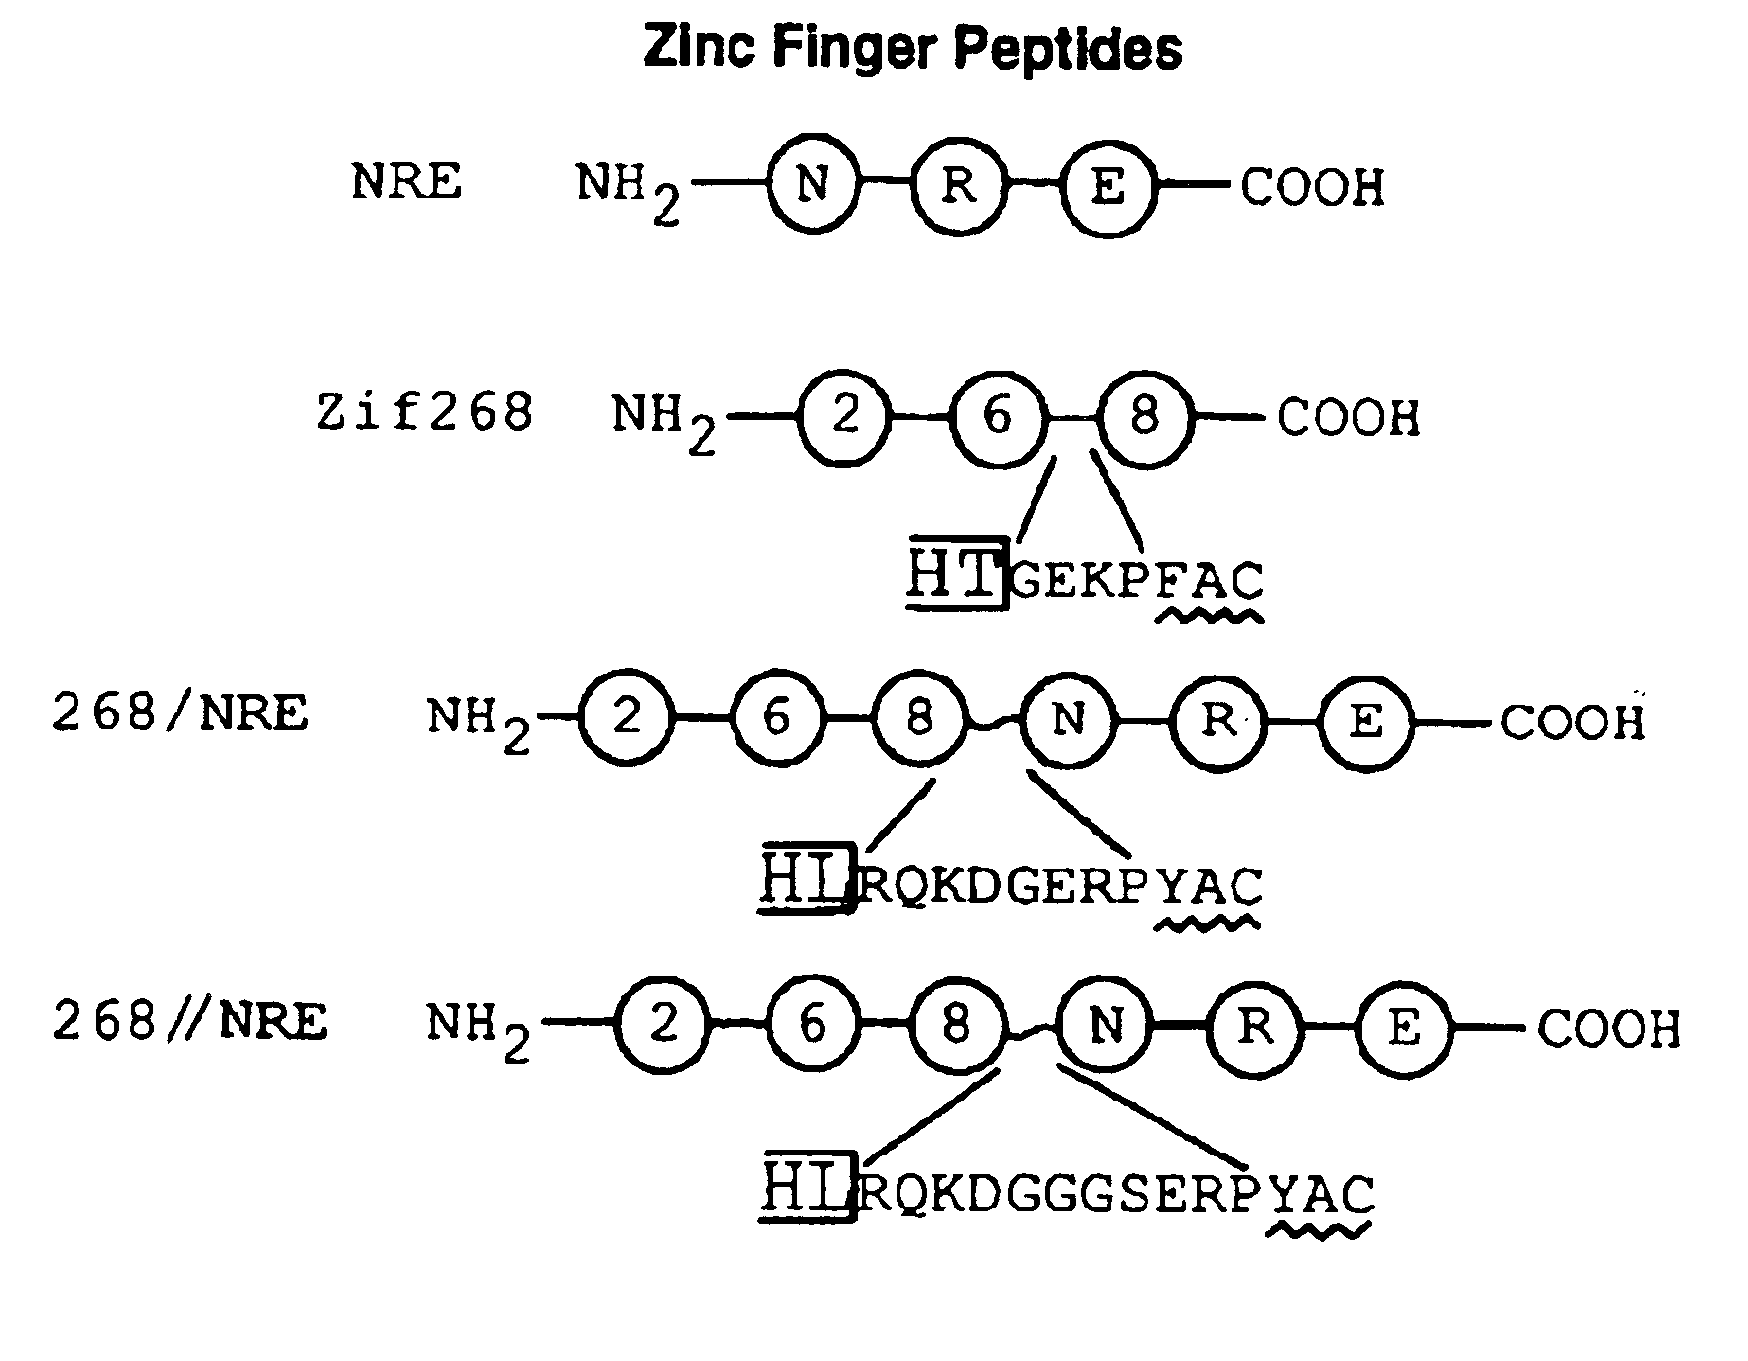 Poly zinc finger proteins with improved linkers